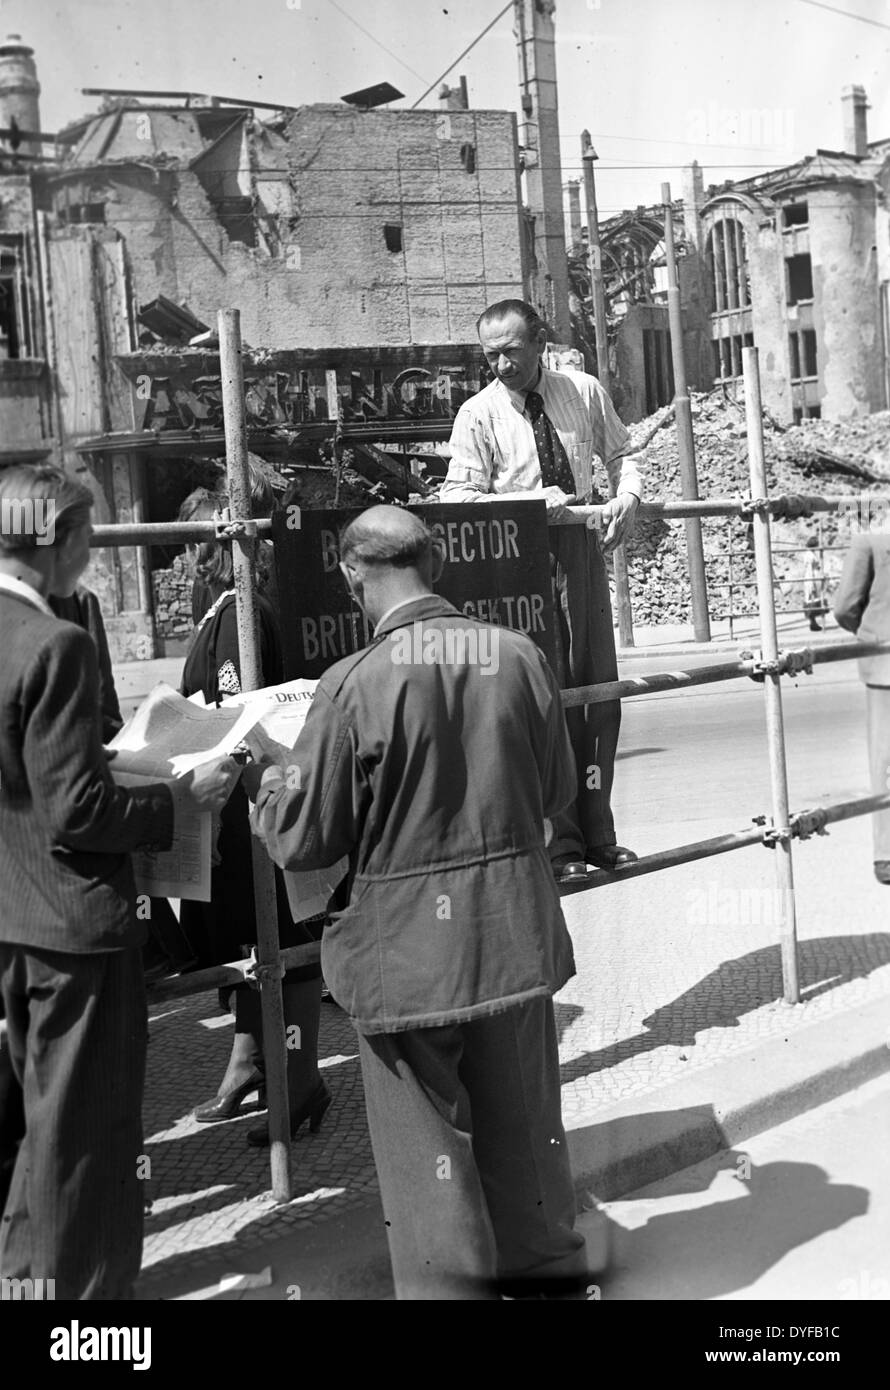 The end of the Berlin Blockade - West Berlin citizens are reading about the announced lifting of the Berlin Blockade in the daily news, at the border between the British and the Soviet Sector at Potsdam Square. Stock Photo